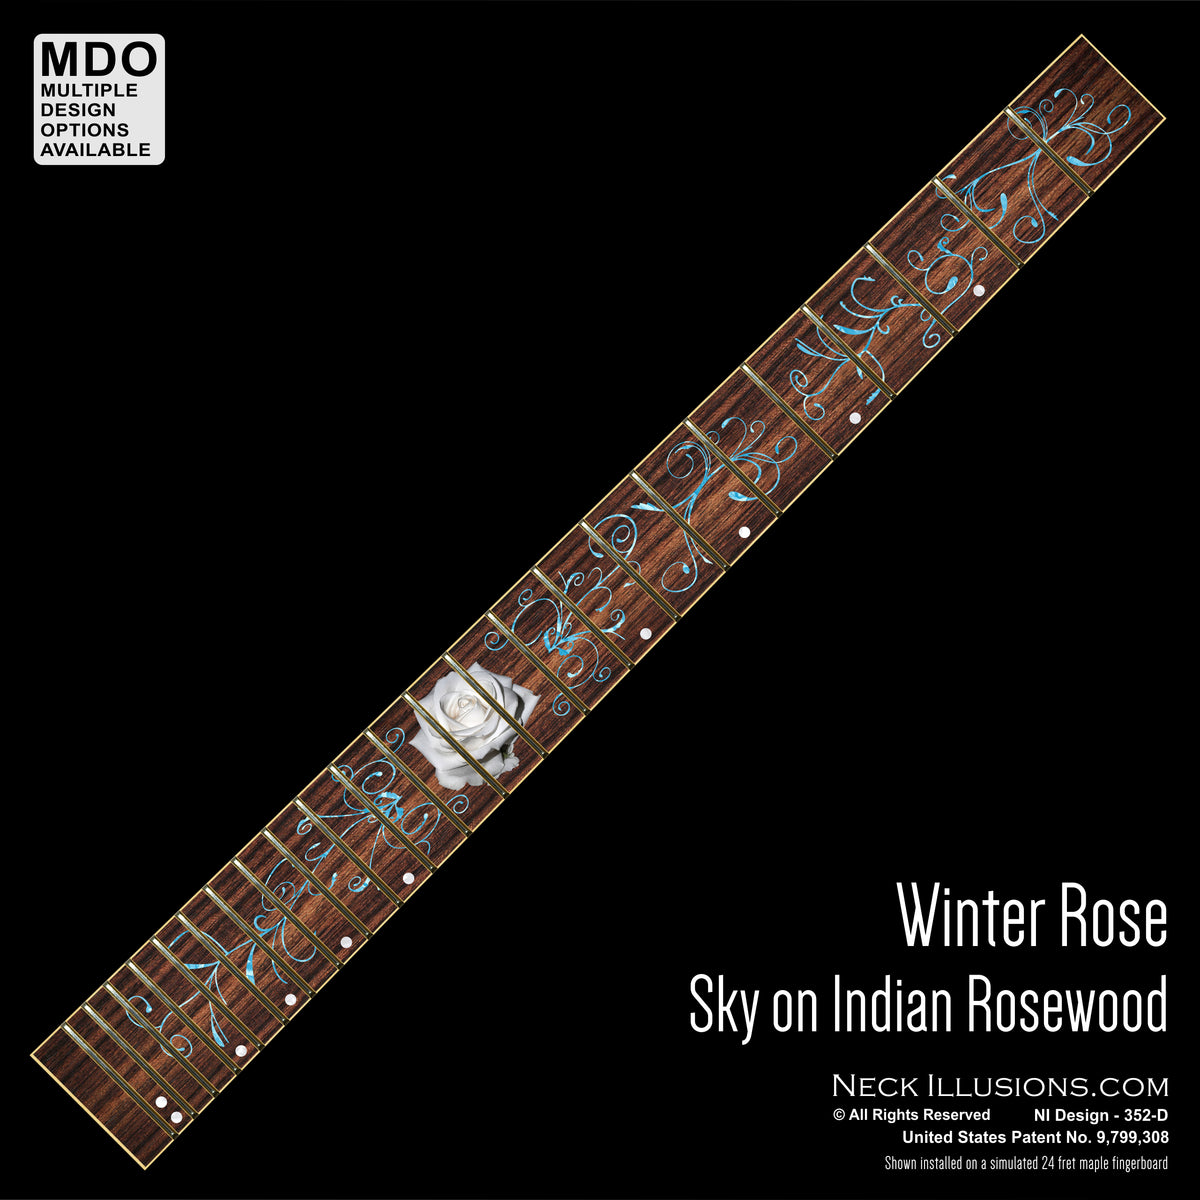 Winter Rose on Indian Rosewood